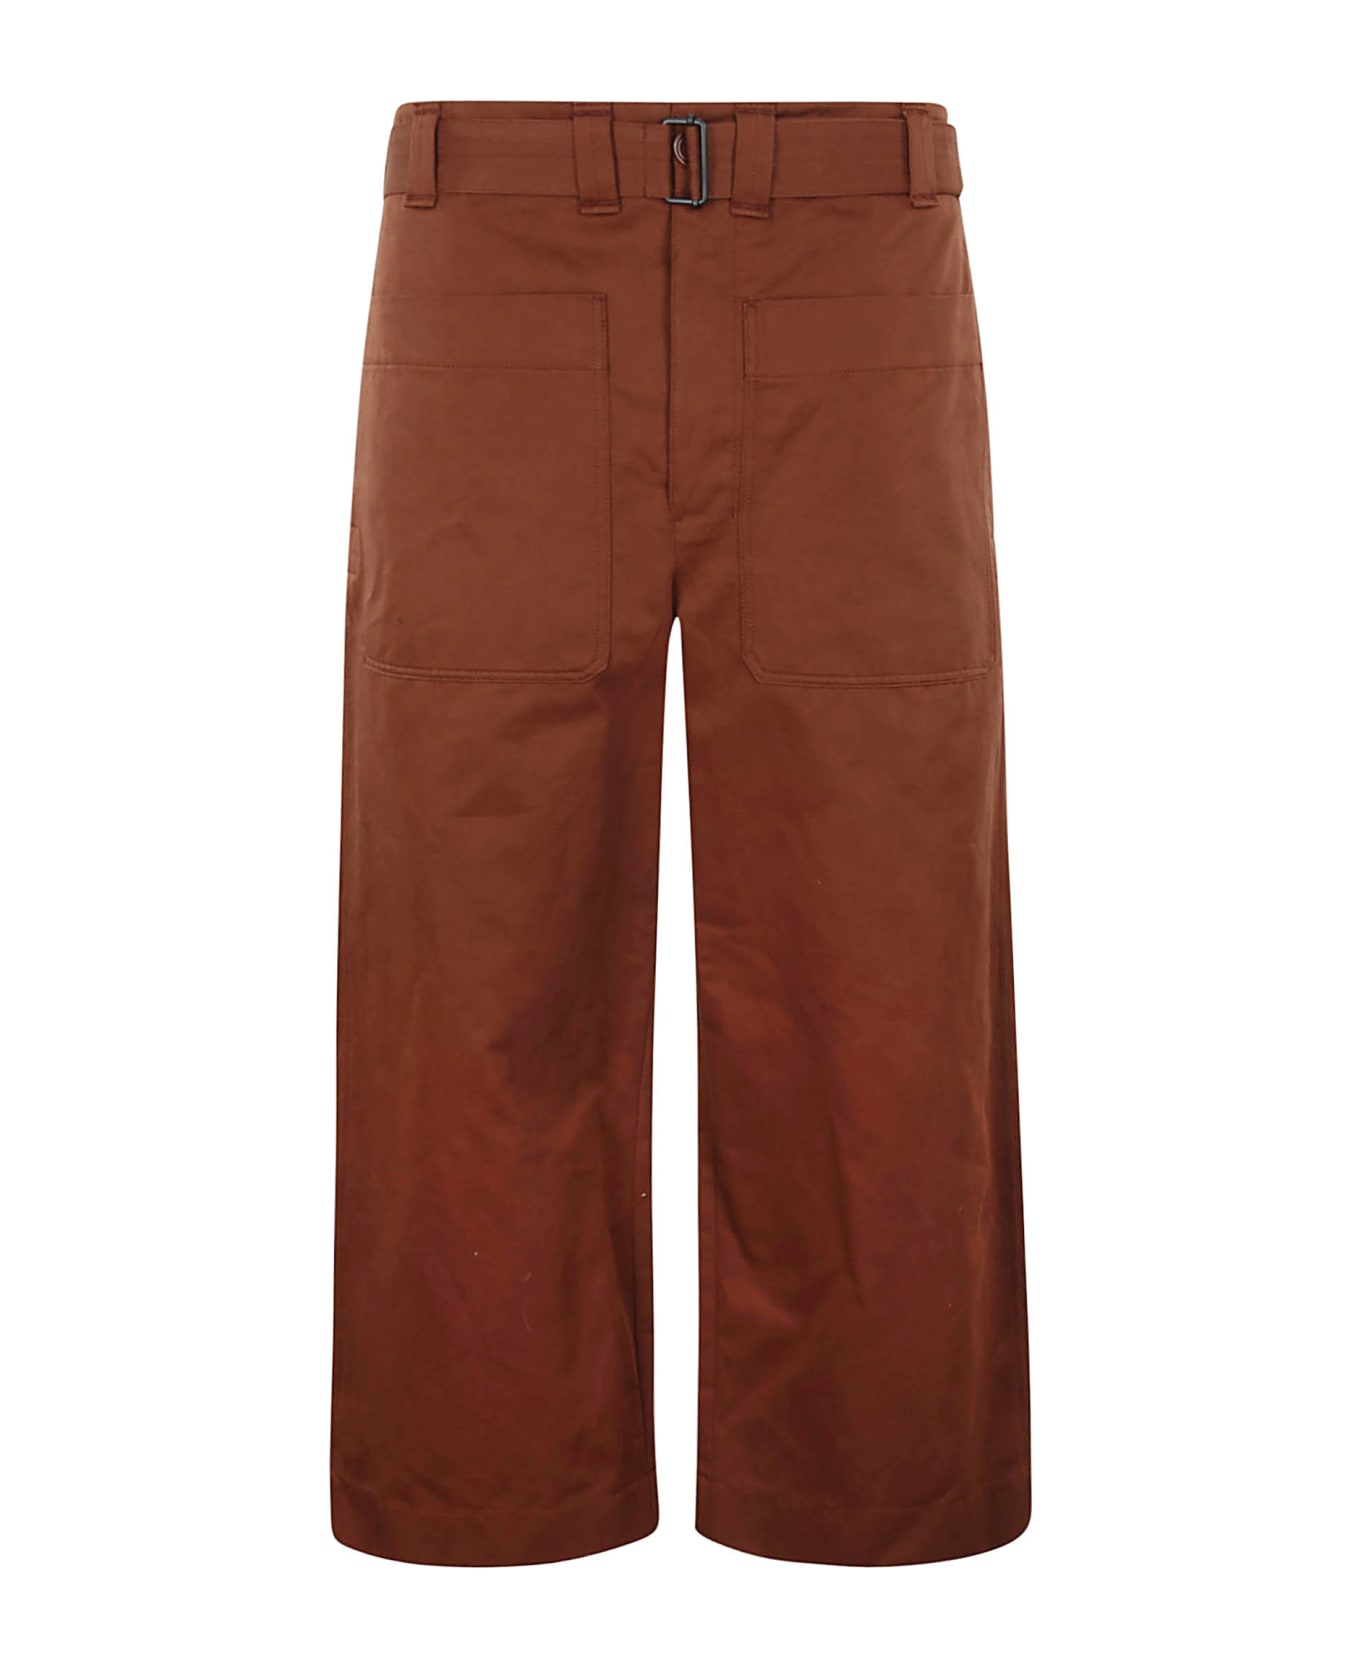 Lemaire Cropped Belted Pocket Pants - Chocolate Fondant